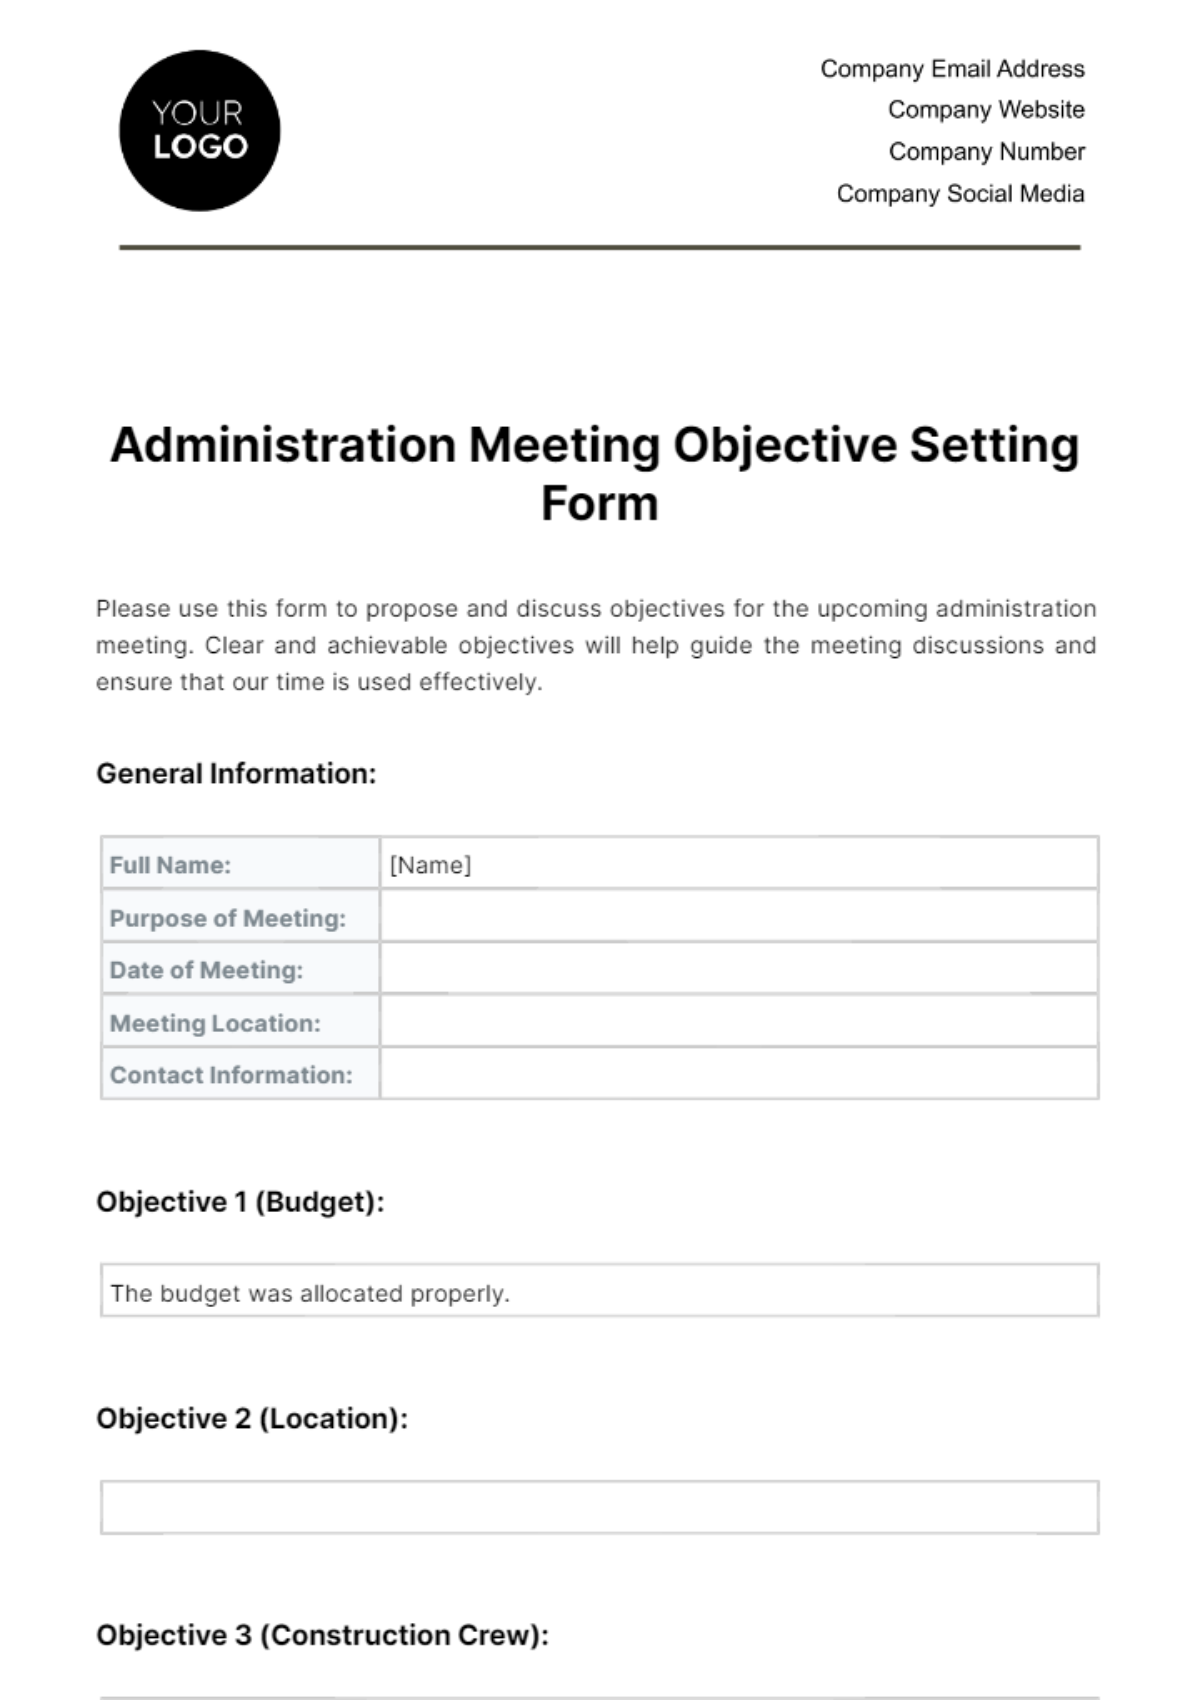 Free Administration Meeting Objective Setting Form Template